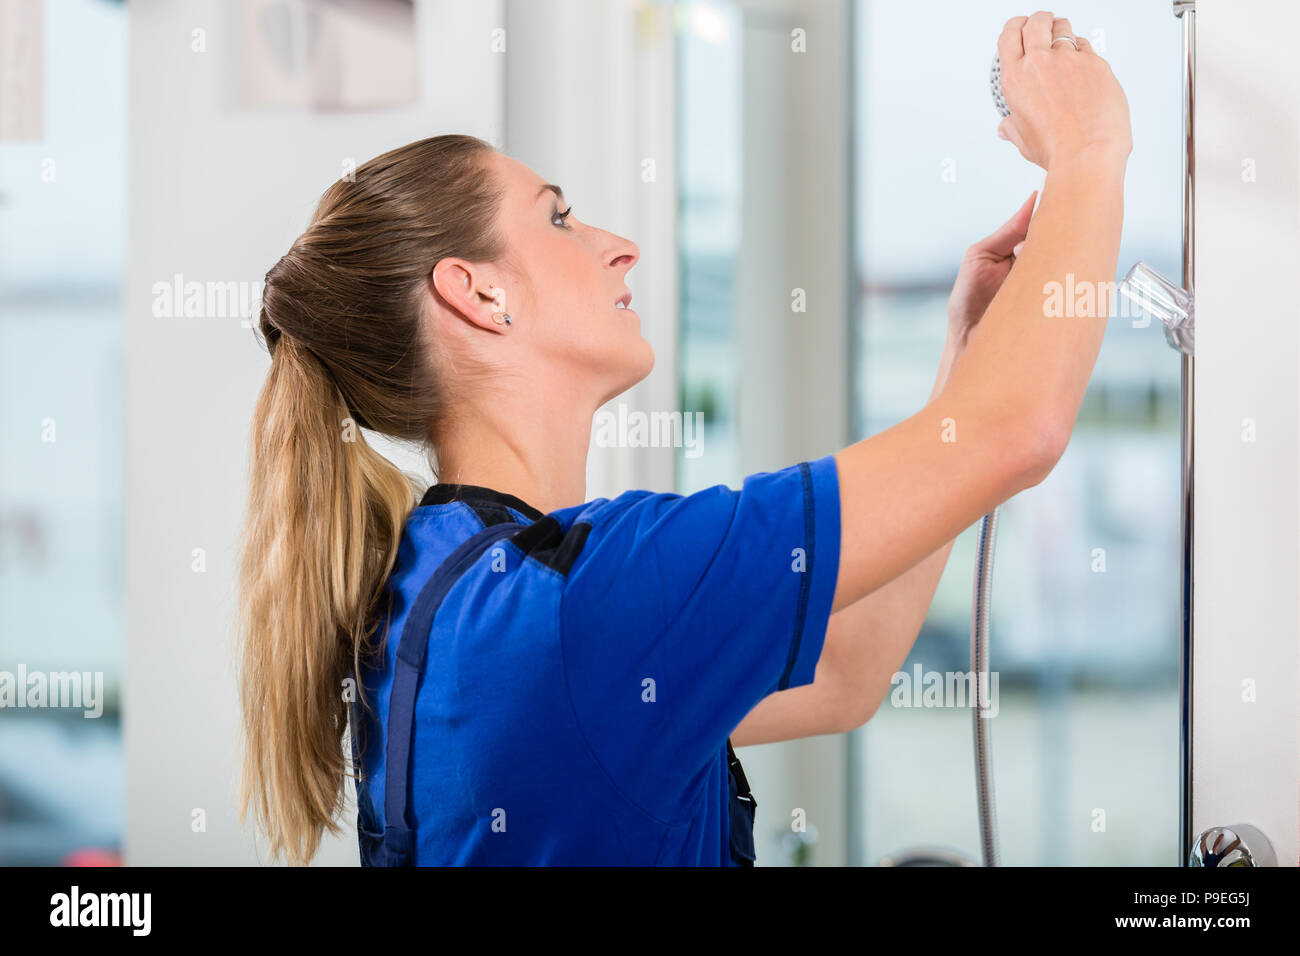 Skilled female worker checking a showerhead in a modern sanitary ware shop Stock Photo